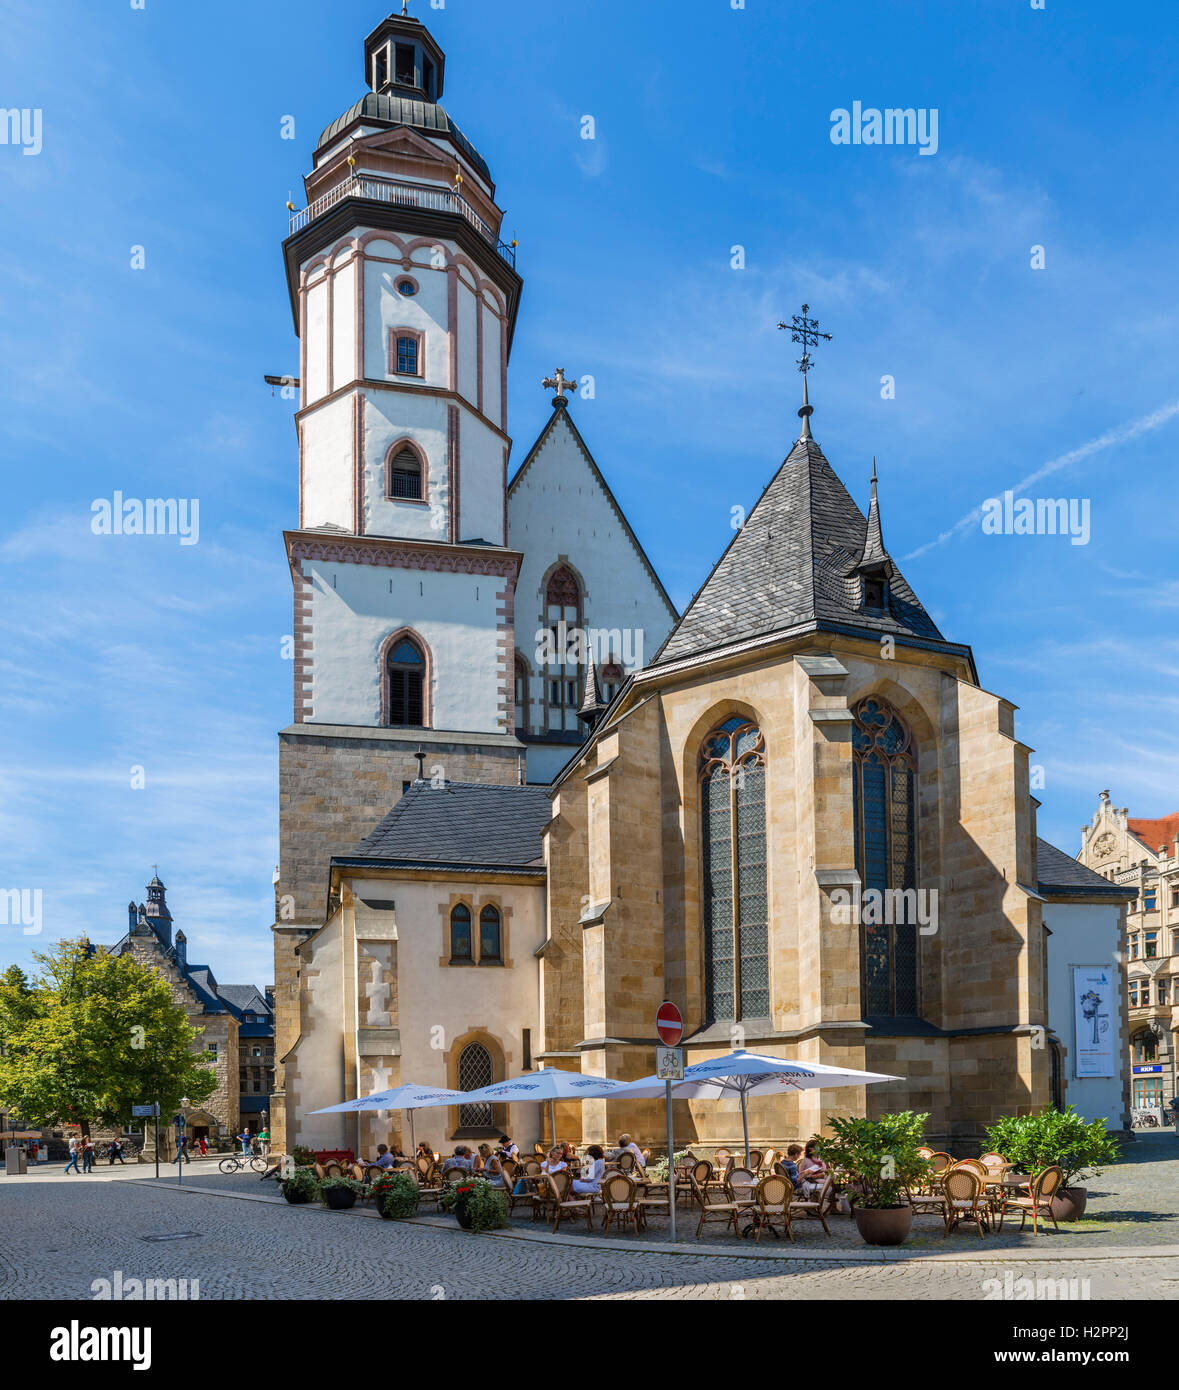 The Thomaskirche (St Thomas Church), where J S Bach served as cantor for the last 27 years of his life, Leipzig, Saxony, Germany Stock Photo